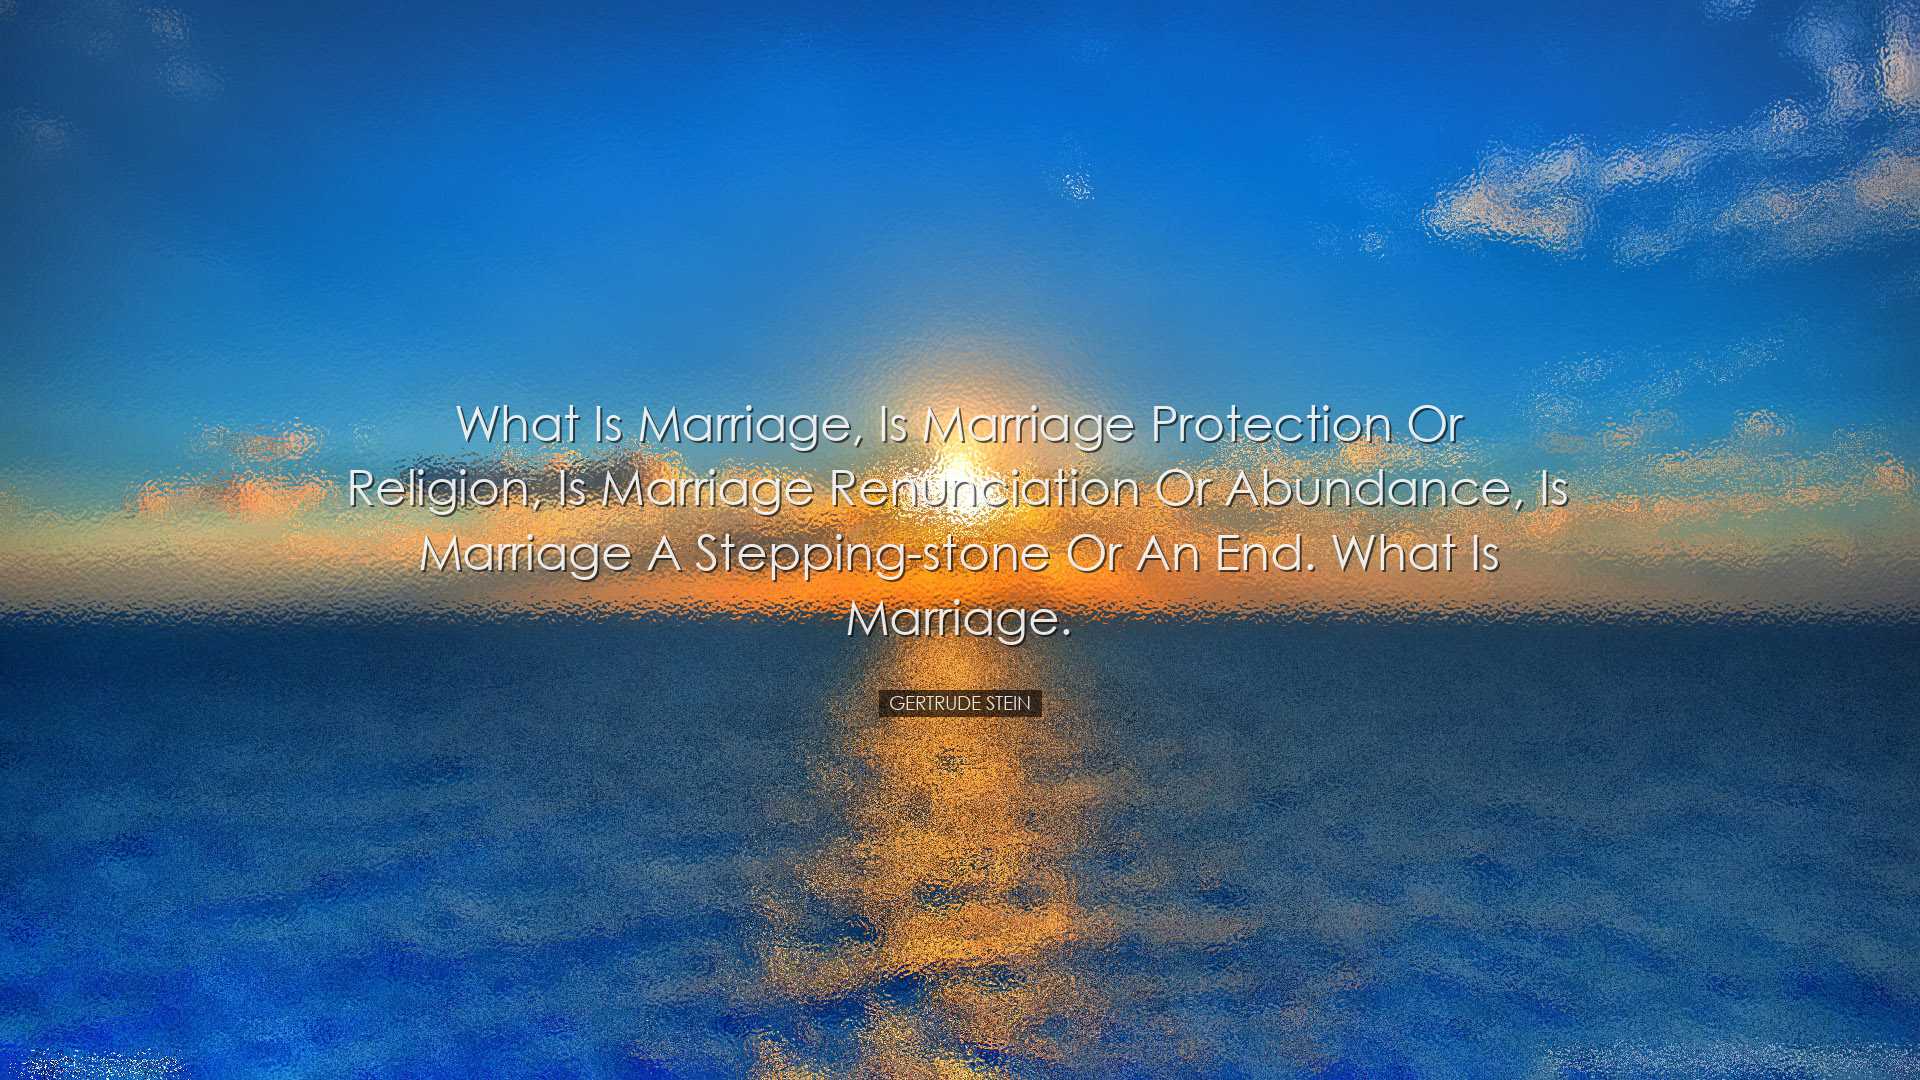 What is marriage, is marriage protection or religion, is marriage